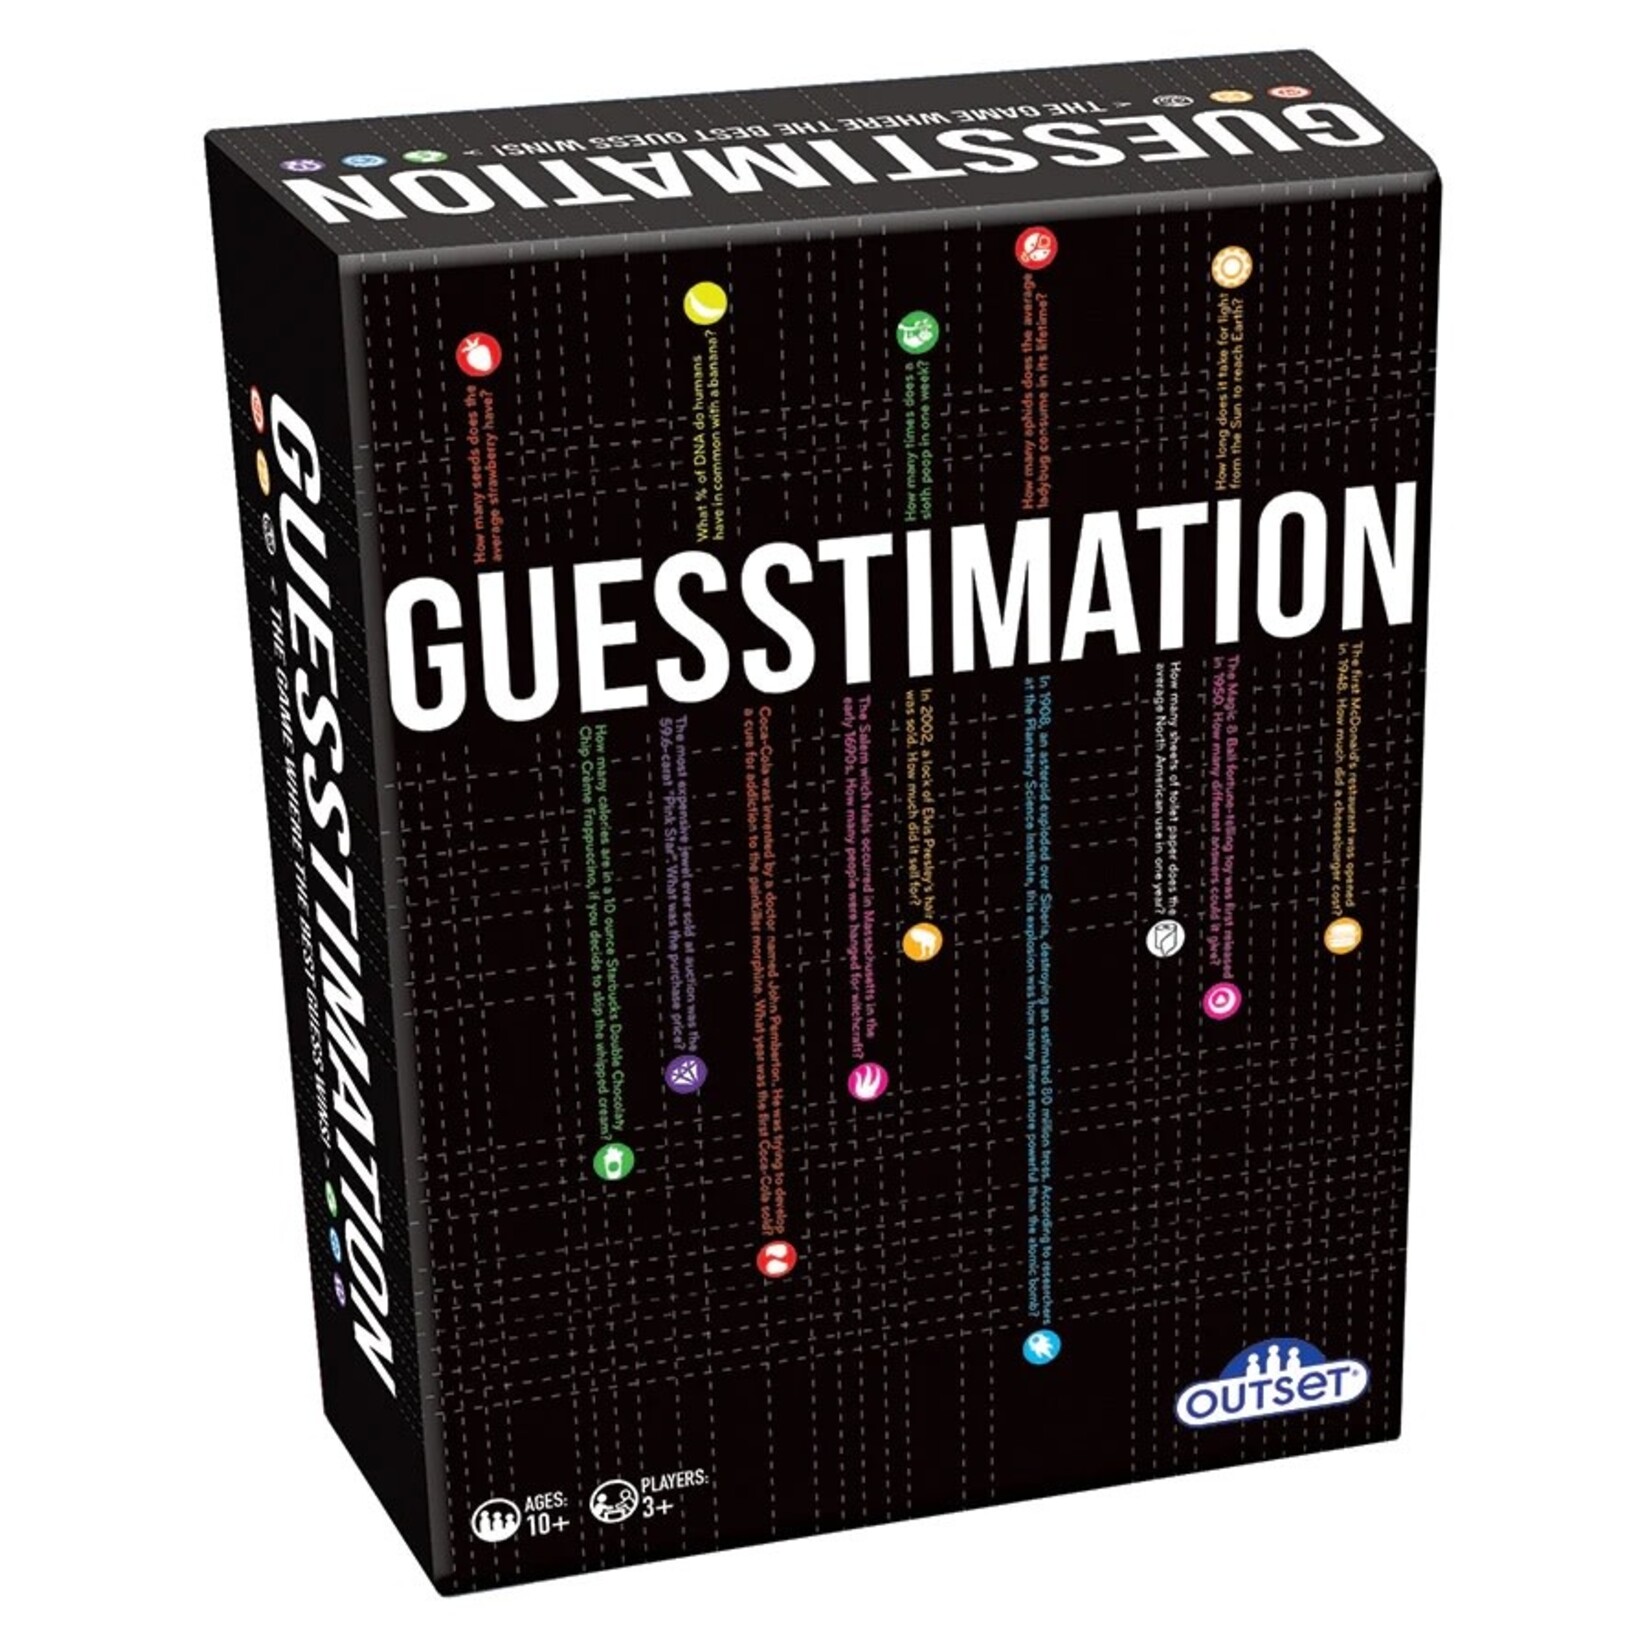 Outset Guesstimation